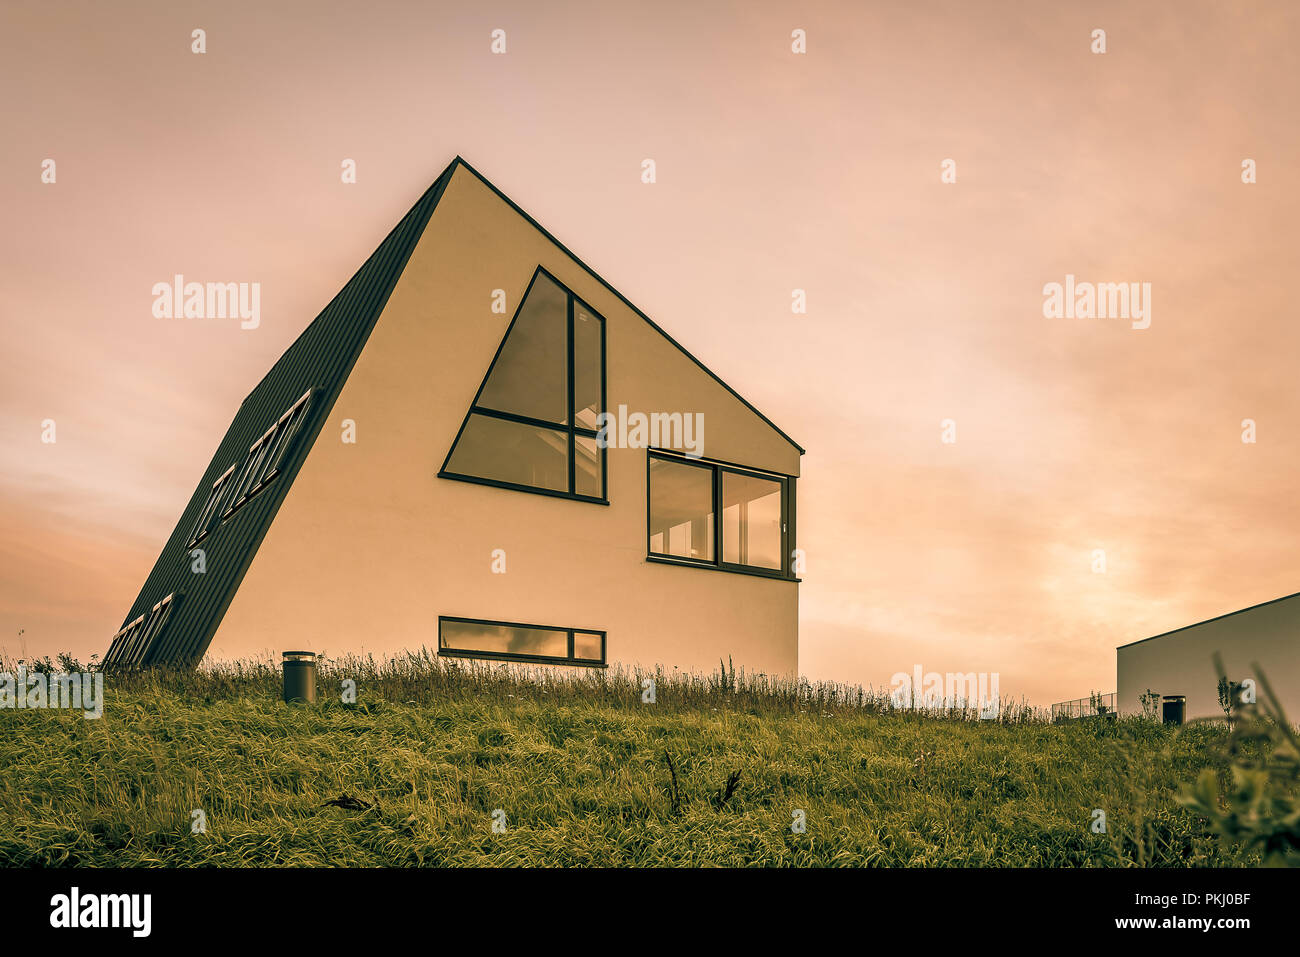 A house in the delta district of the future city Vinge, Federikssund, Denmark, September 12, 2018 Stock Photo